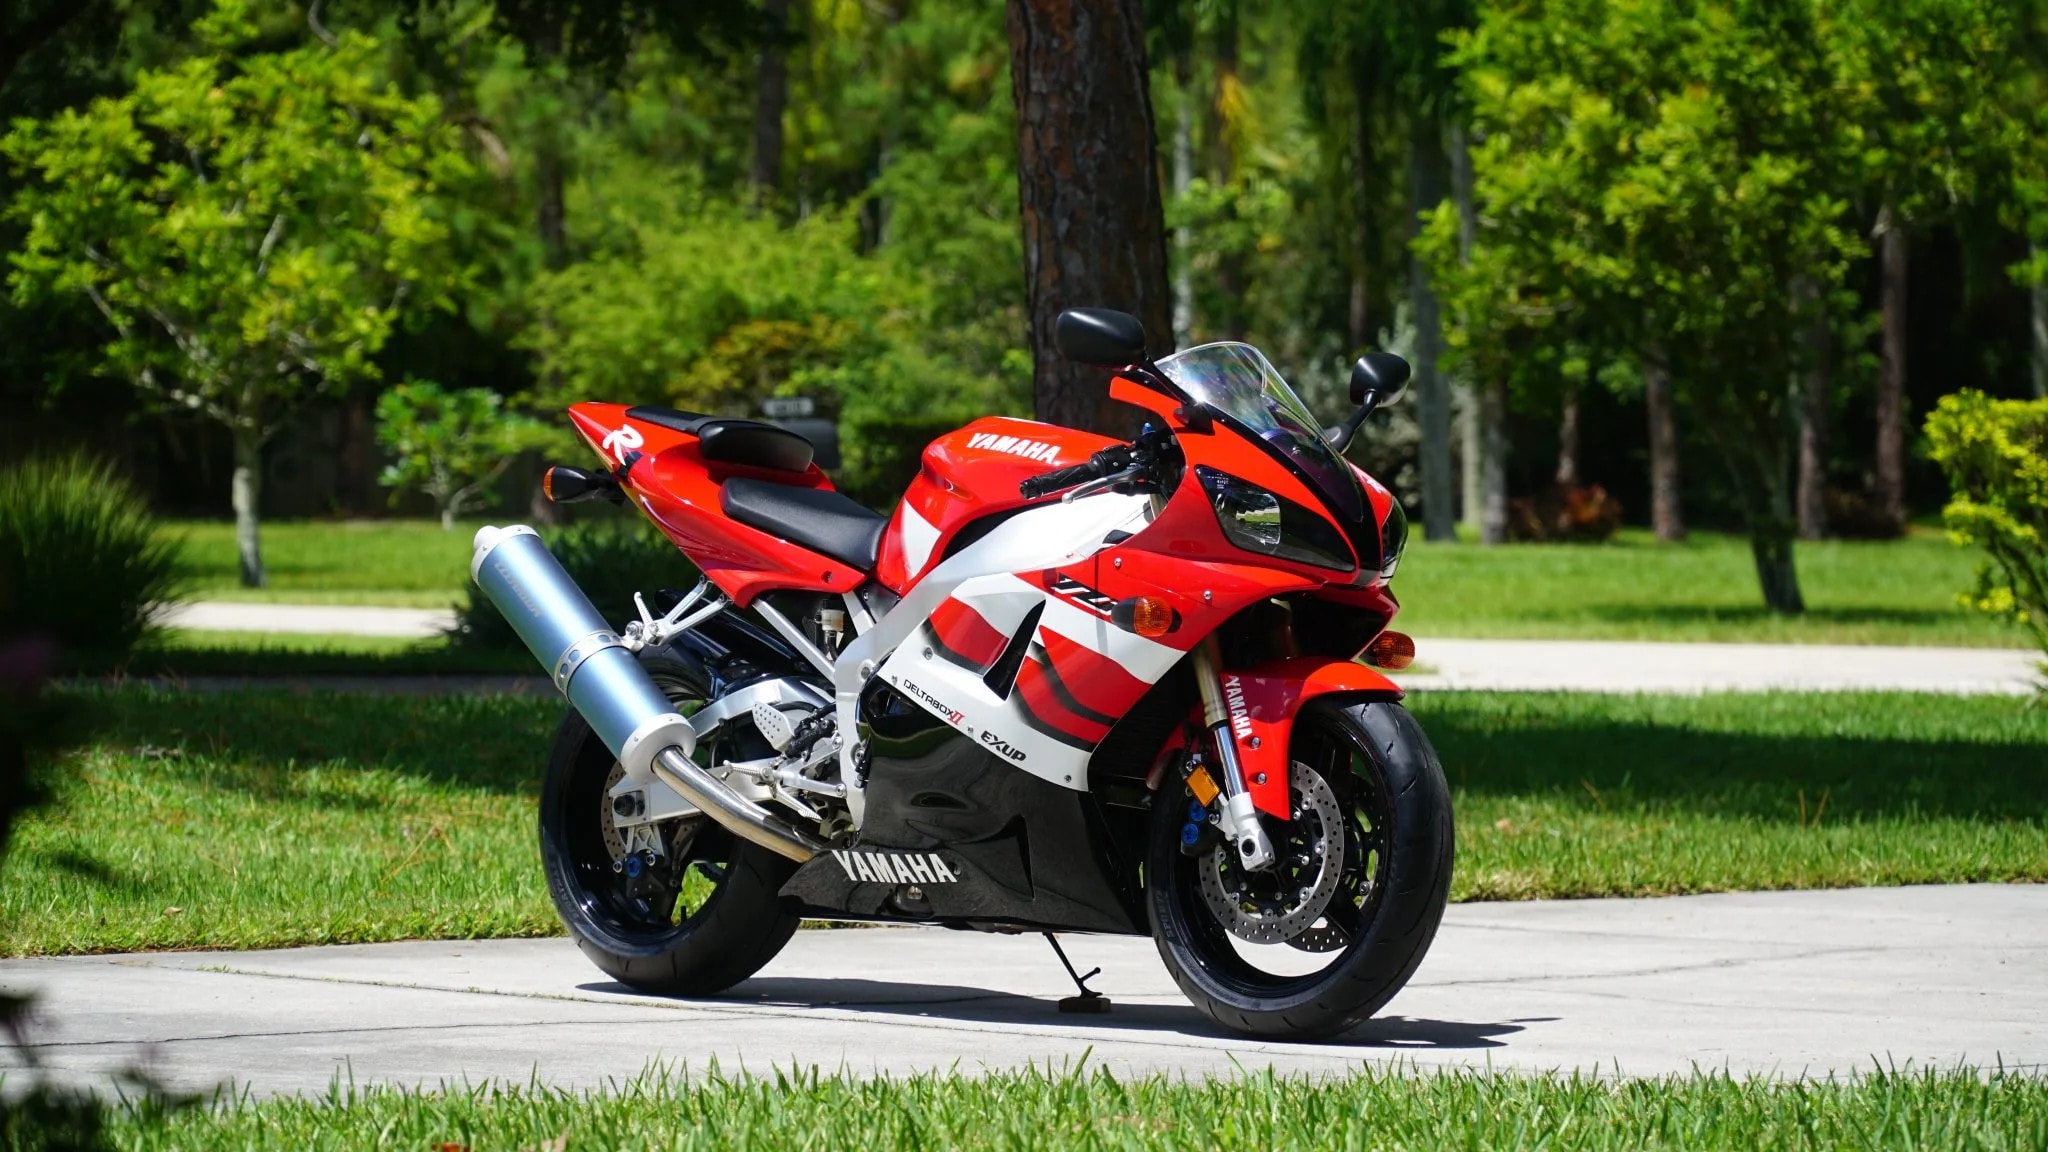 Visualizar Empuje Loco 6K-Mile 2000 Yamaha YZF-R1 Can Deliver Top-Tier Sport Bike Thrills on a  Budget - autoevolution